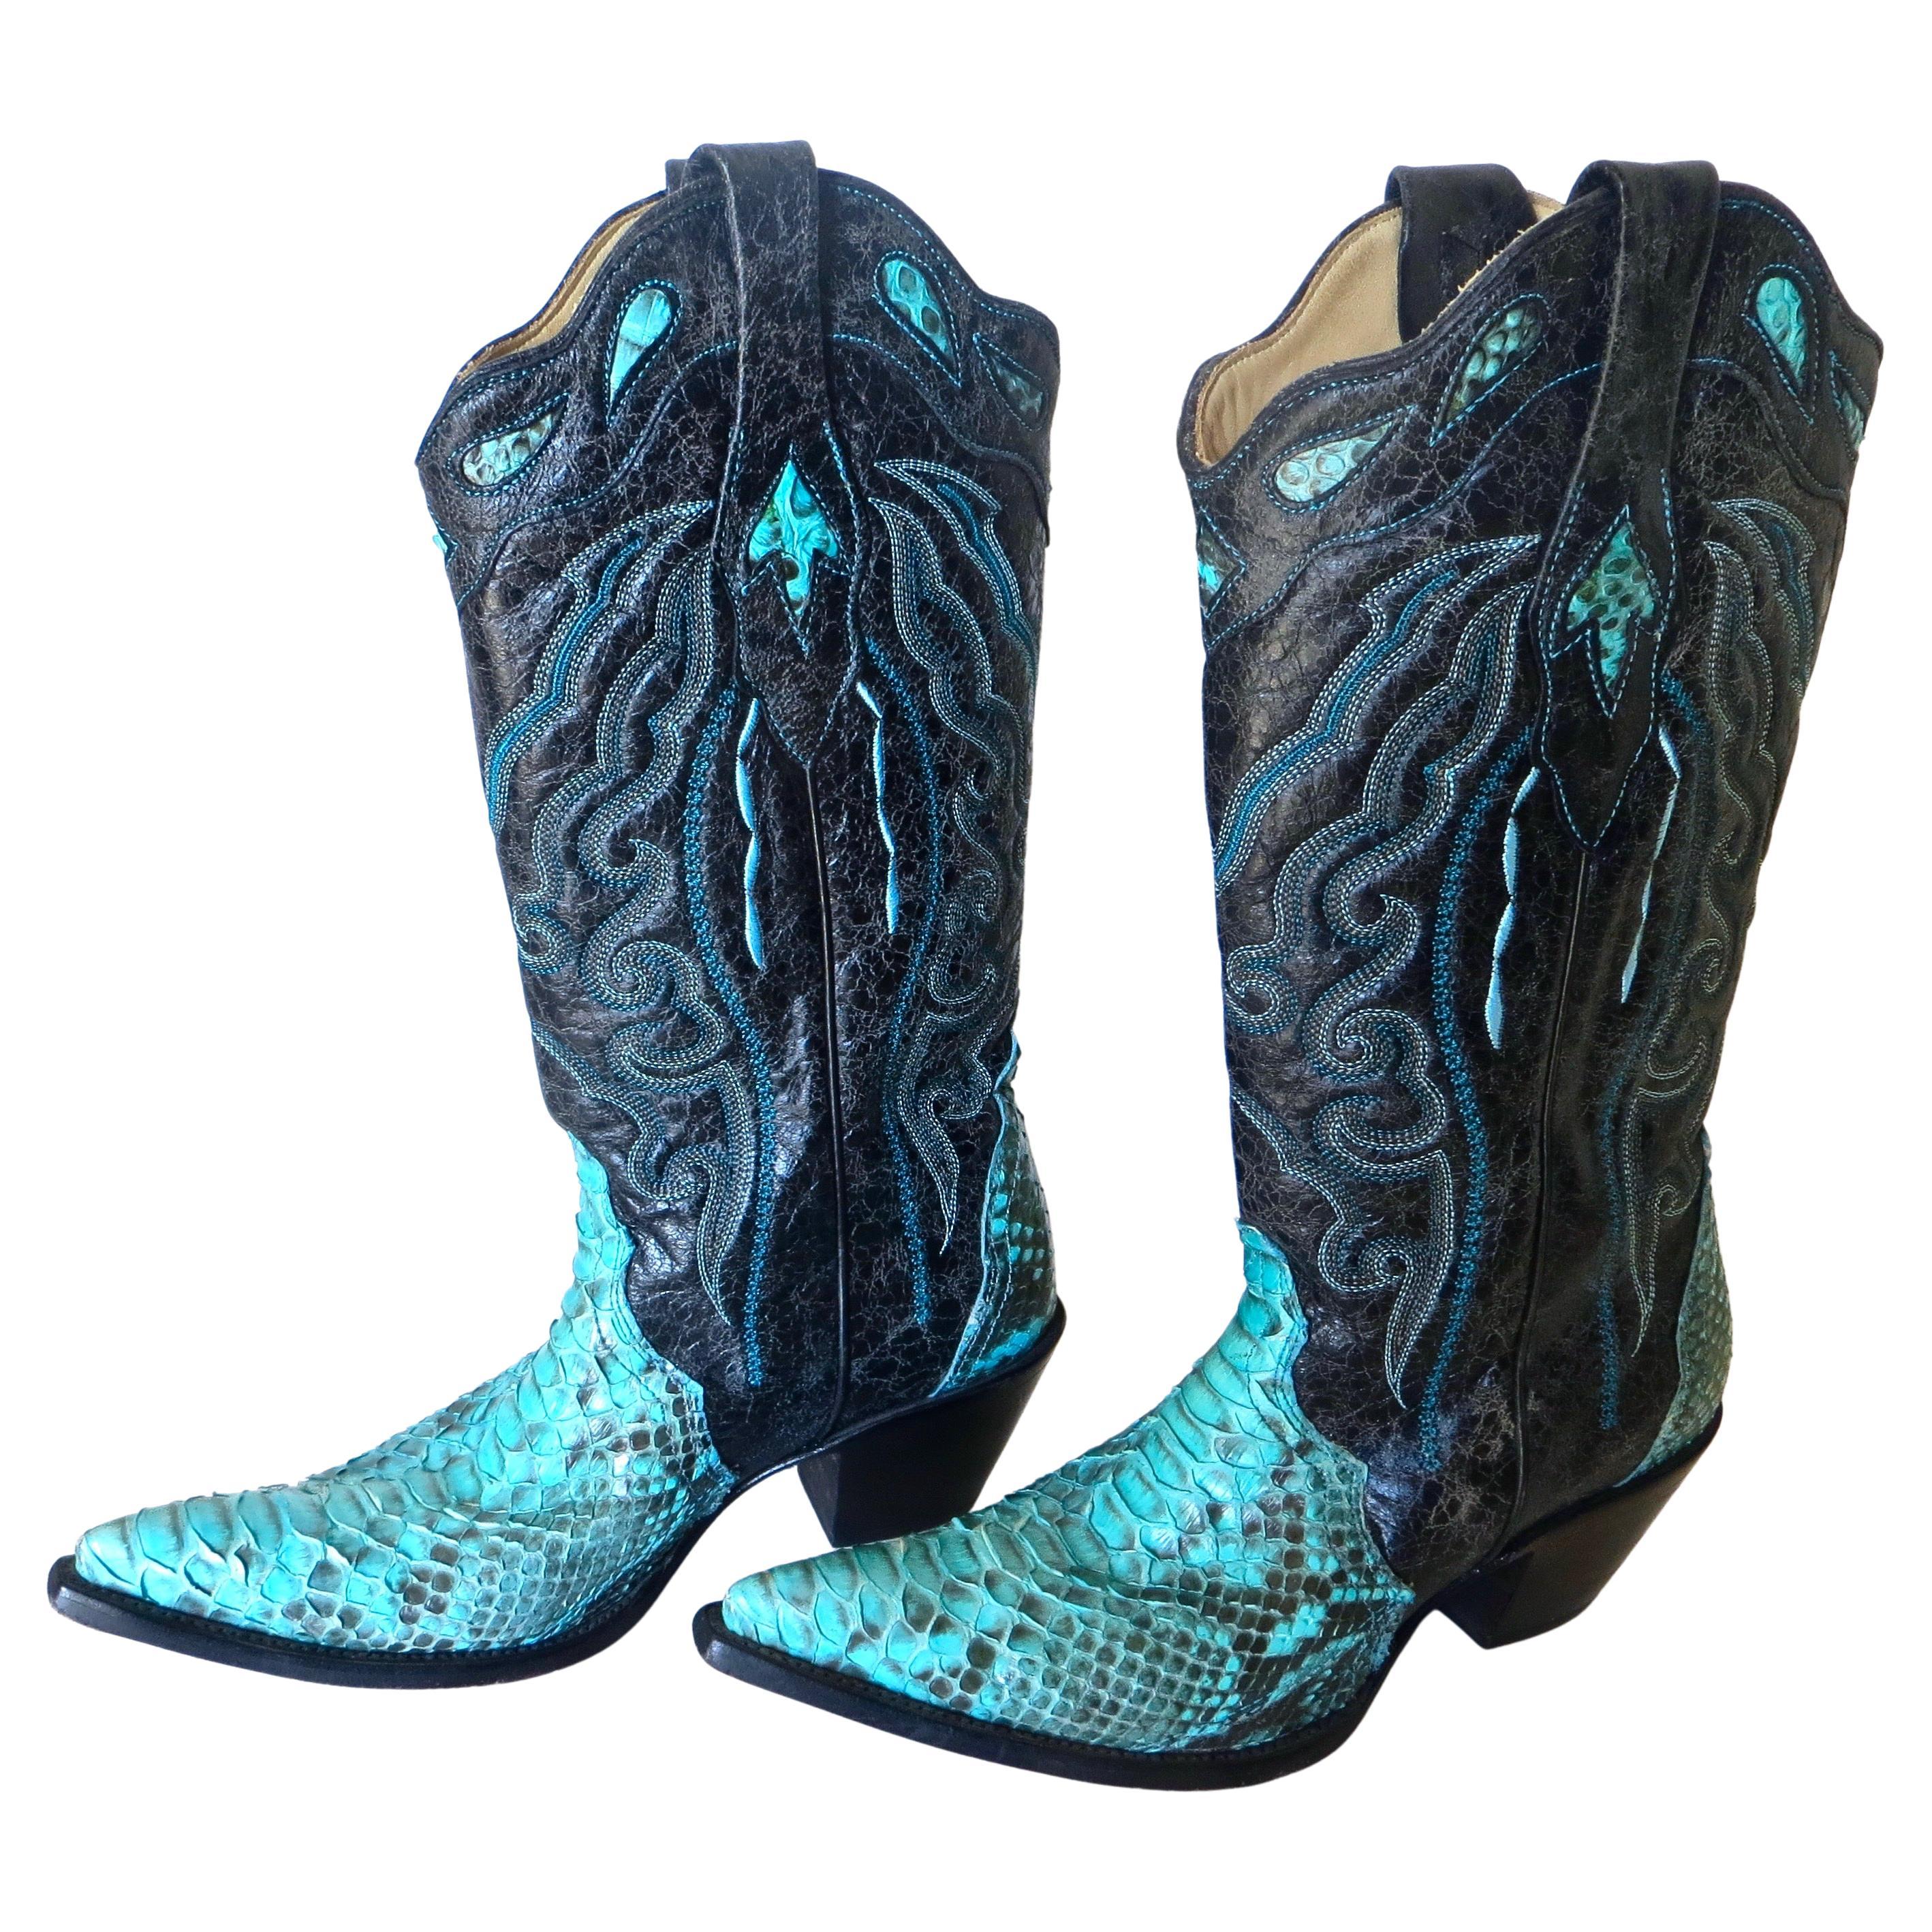 Lady's Cowboy Boots "Turquoise Python" by Corral For Sale